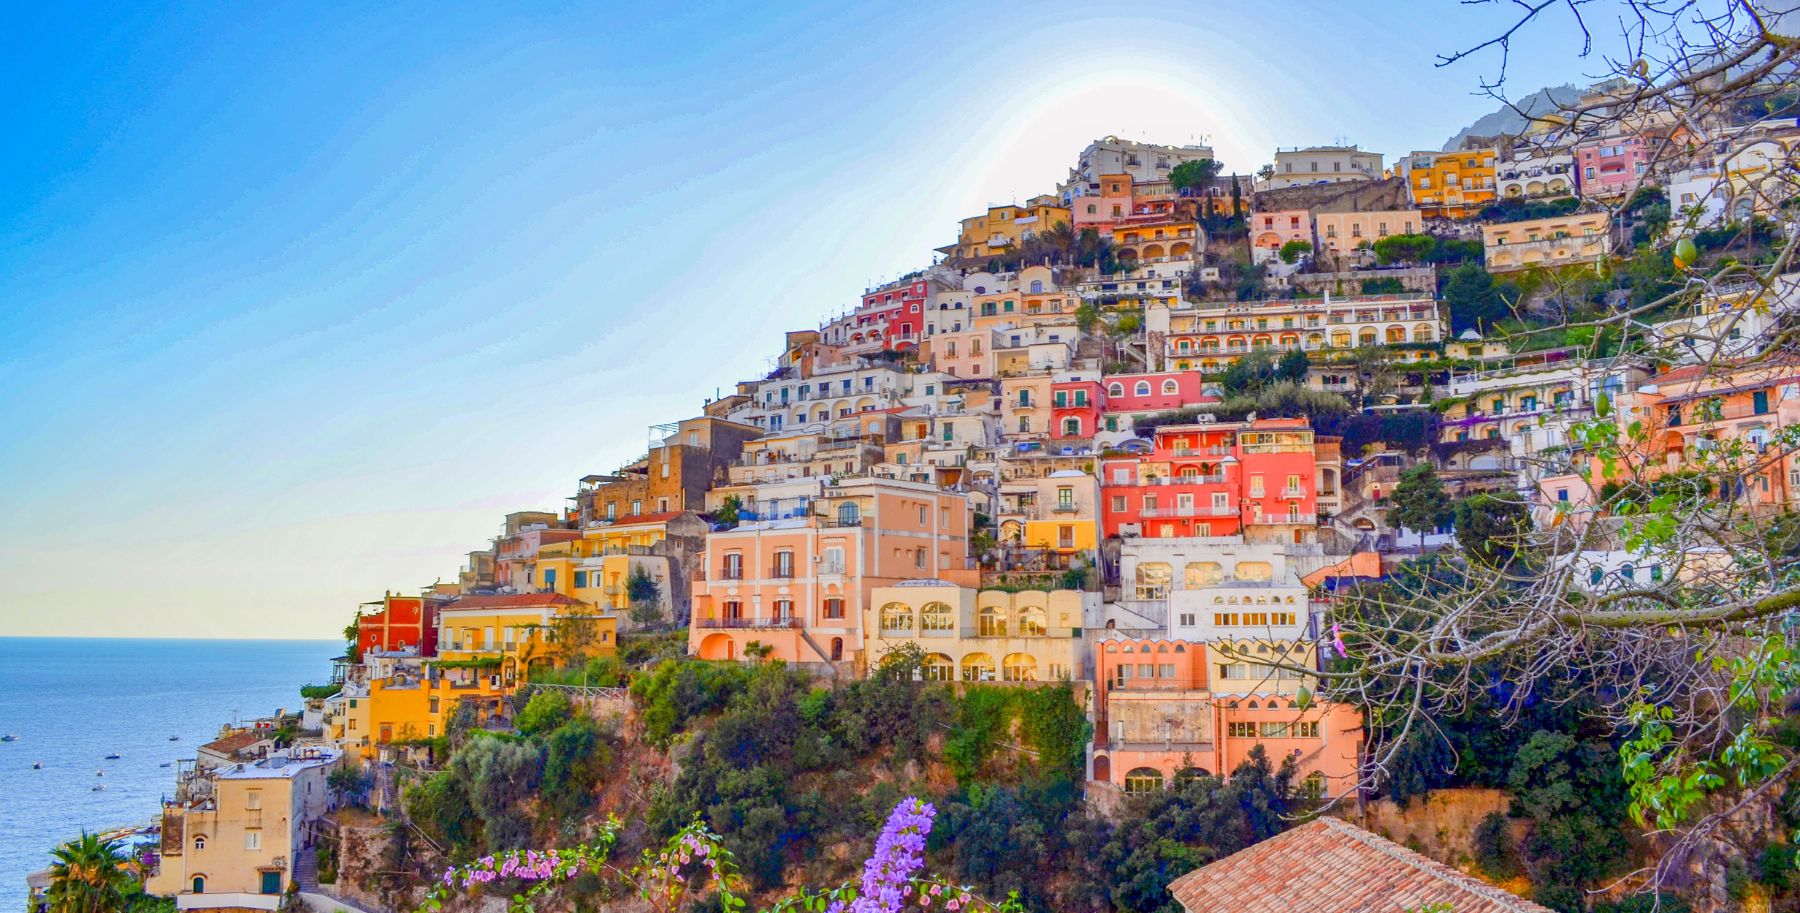 Colorful houses on the rocky mountain with stunning views of the sea in Positano.